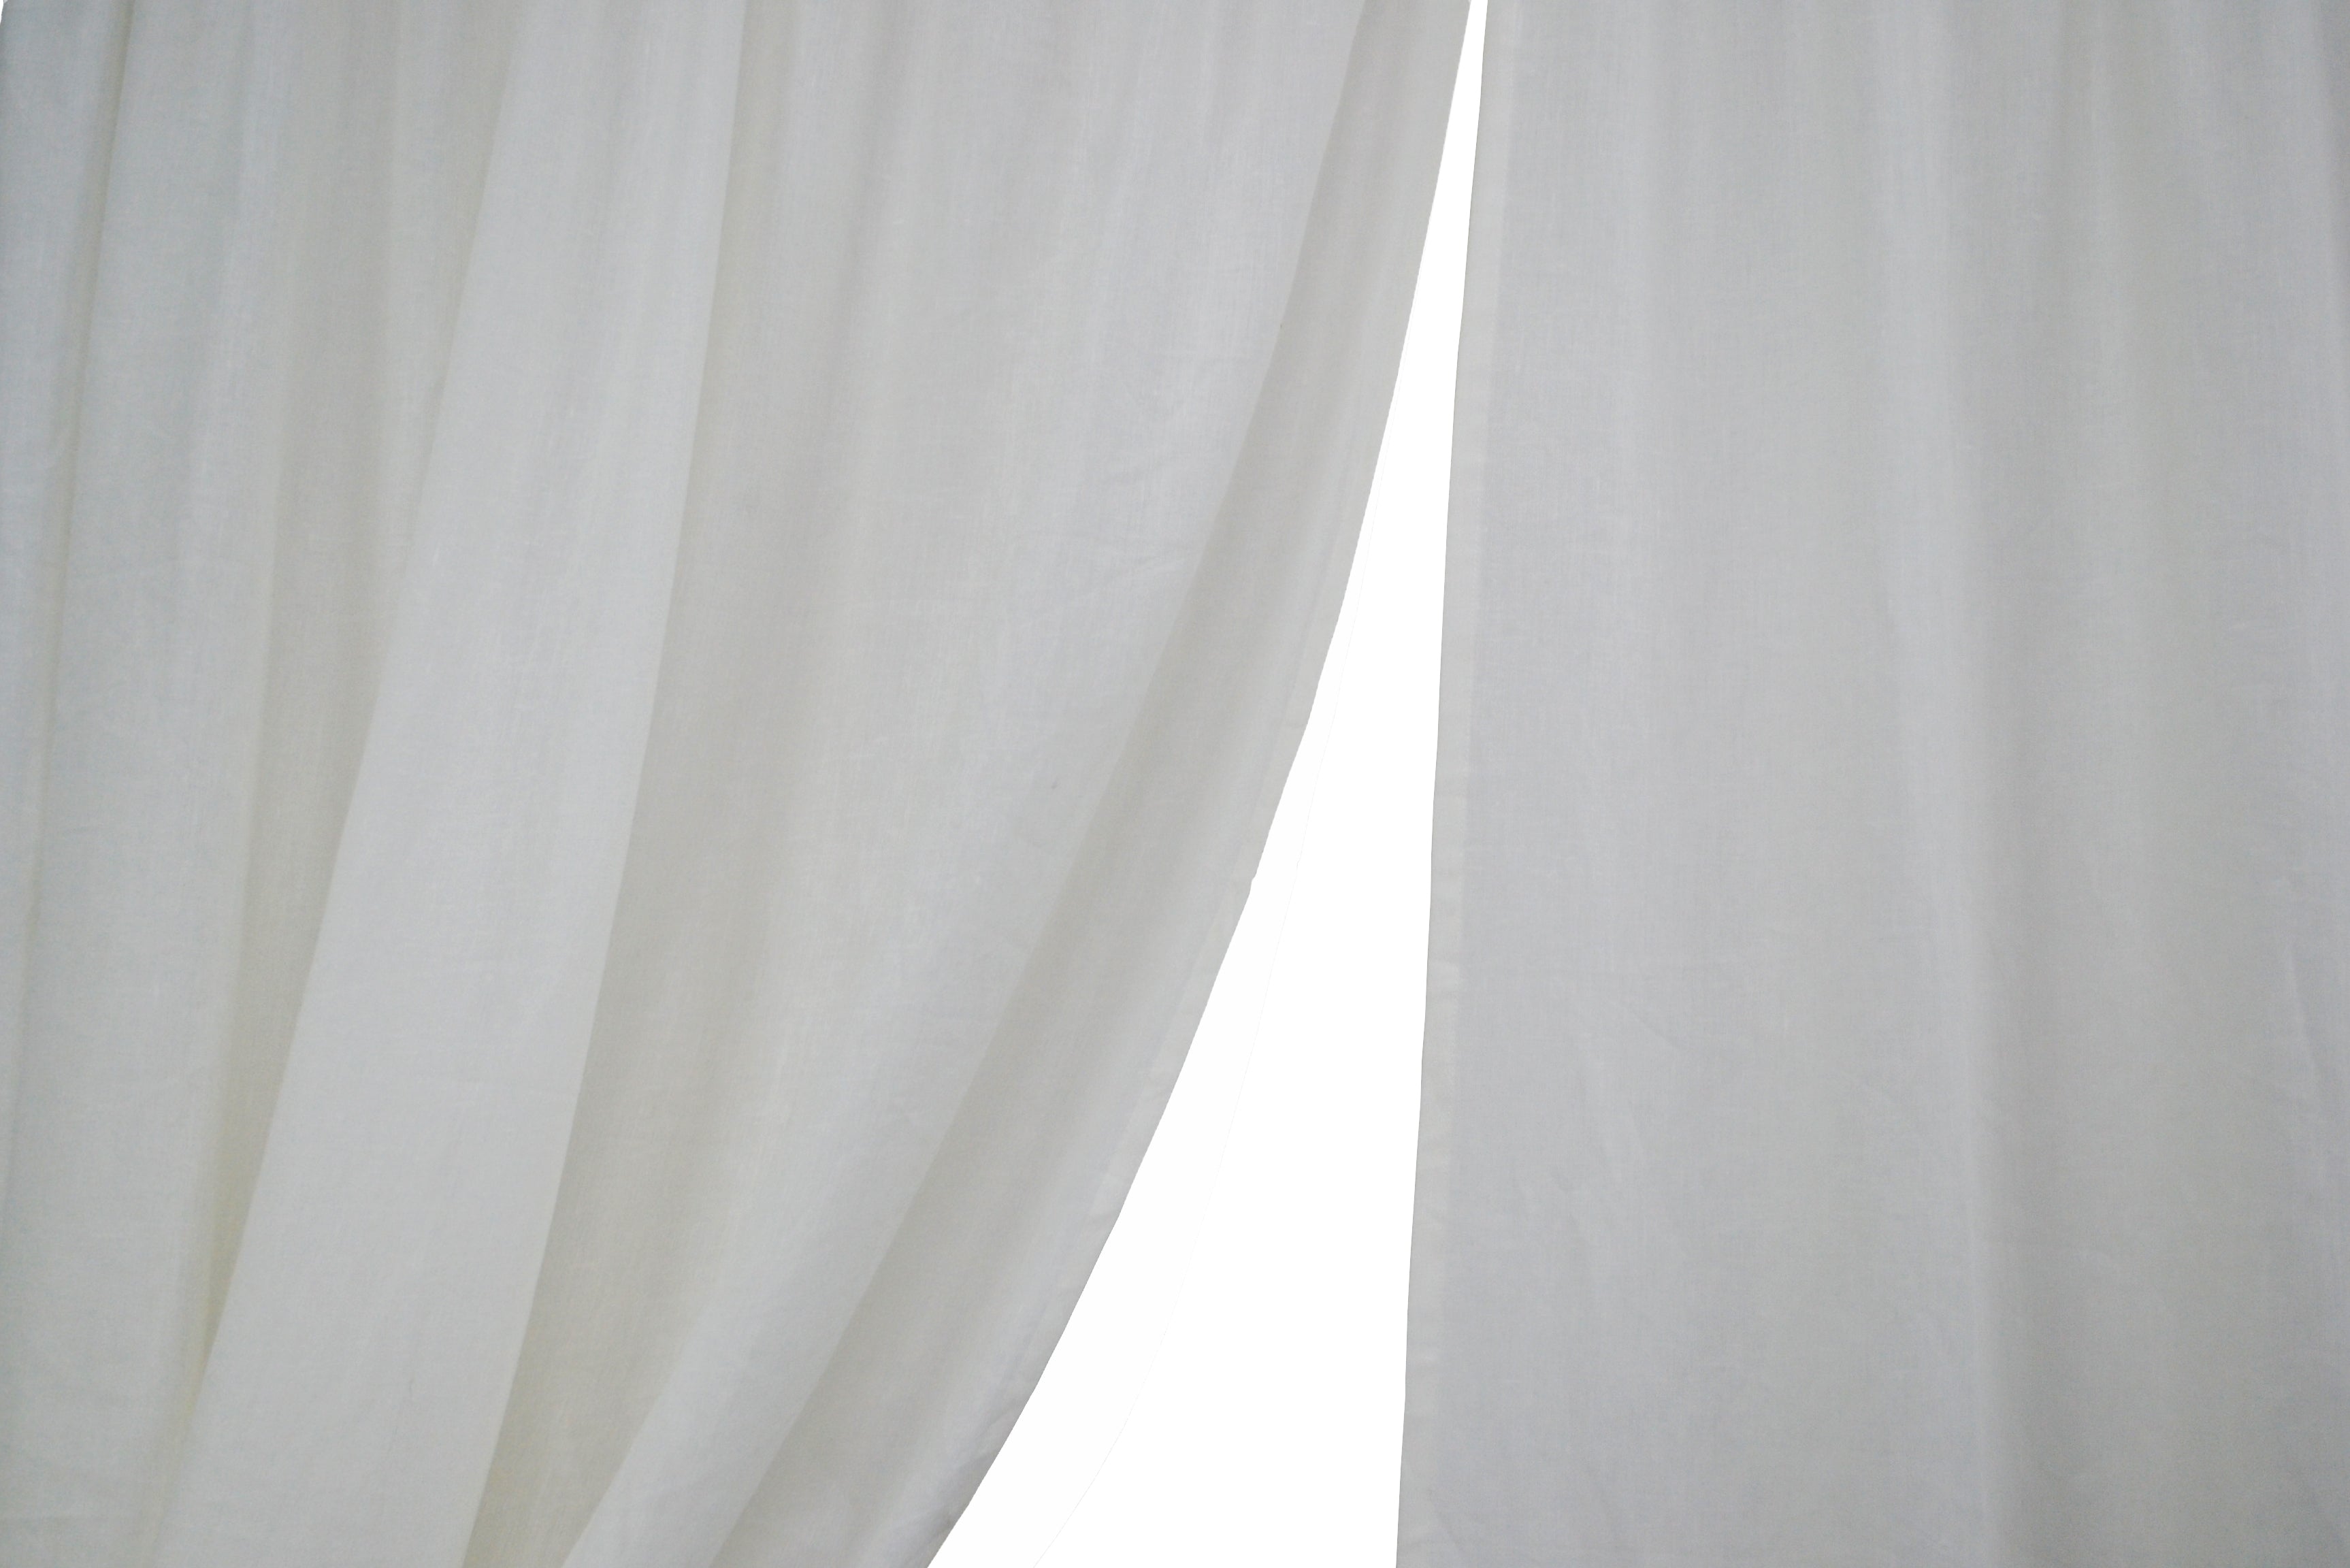 Amore Beaute linen curtain with rod pocket